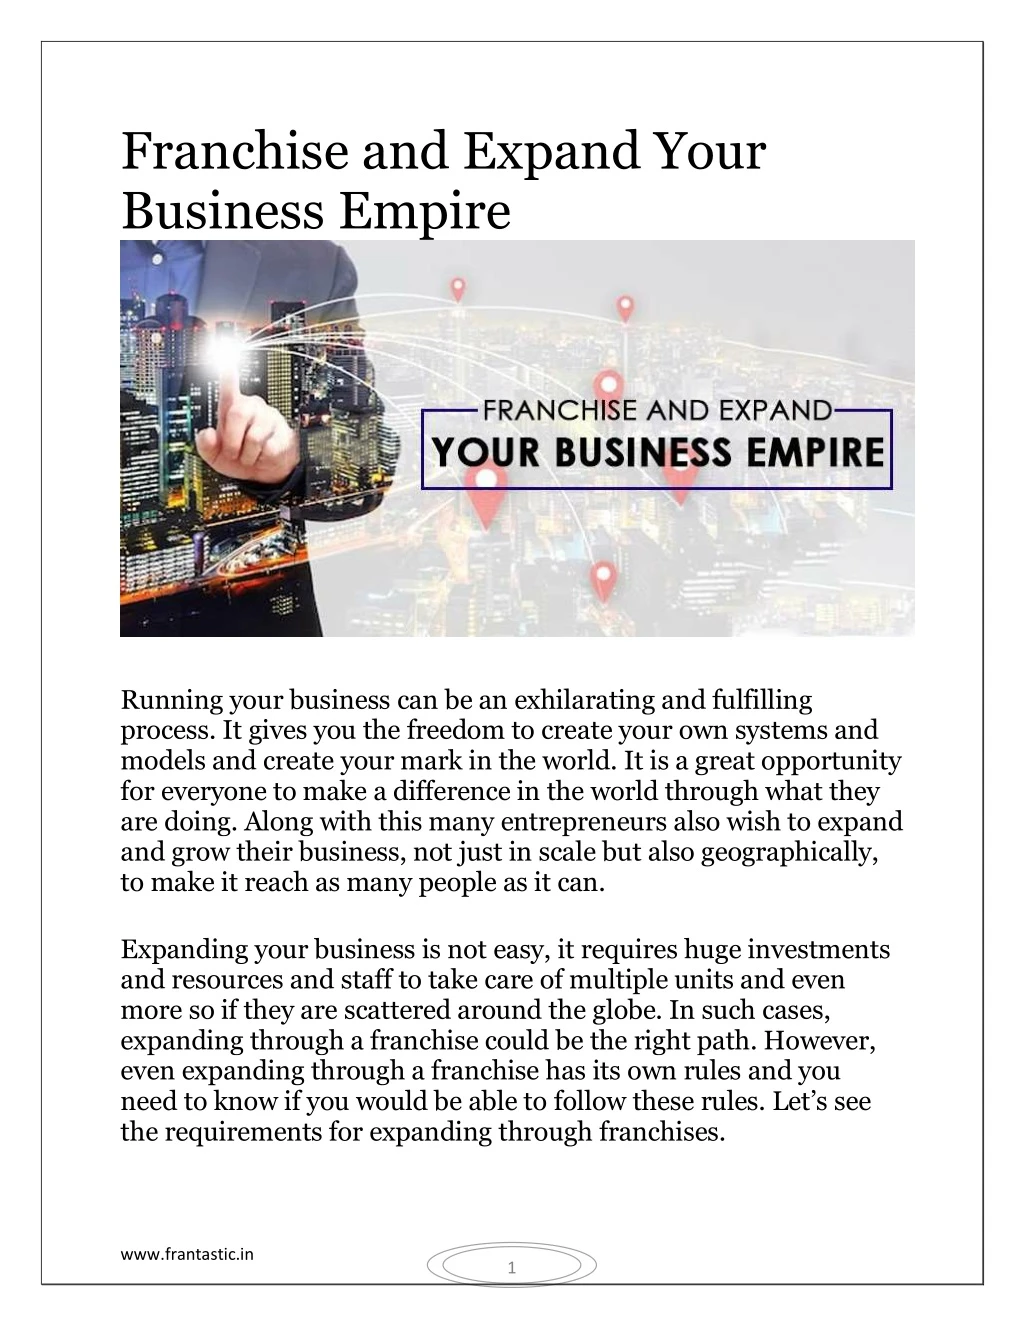 franchise and expand your business empire